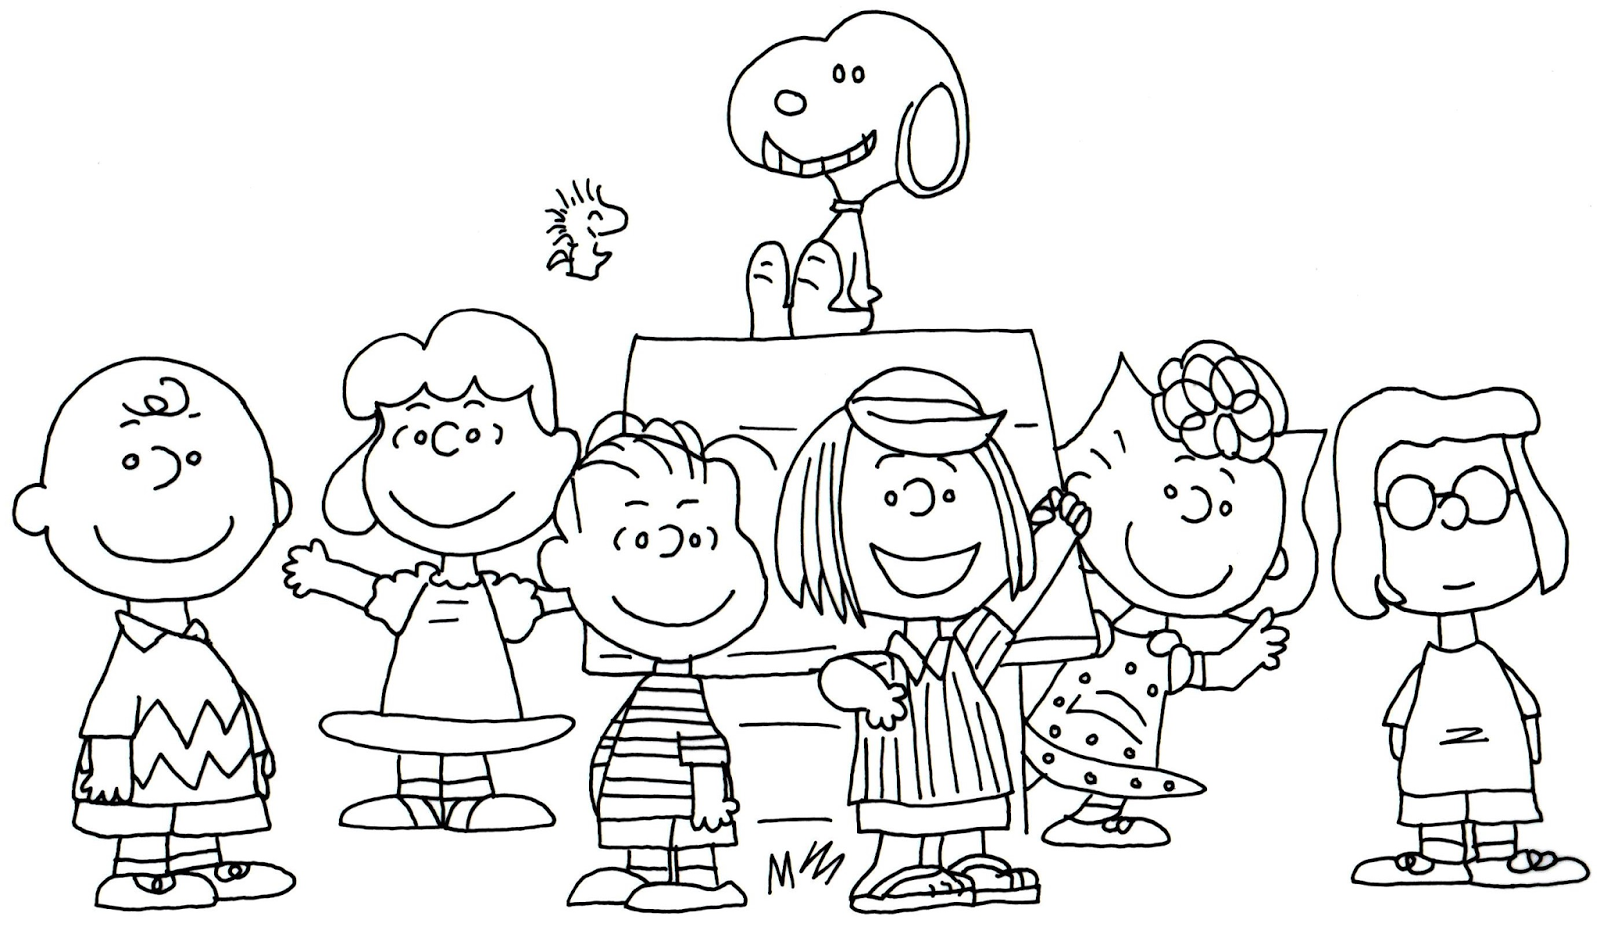 Free Woodstock Snoopy Coloring Pages Download Free Clip Art Free Clip Art On Clipart Library